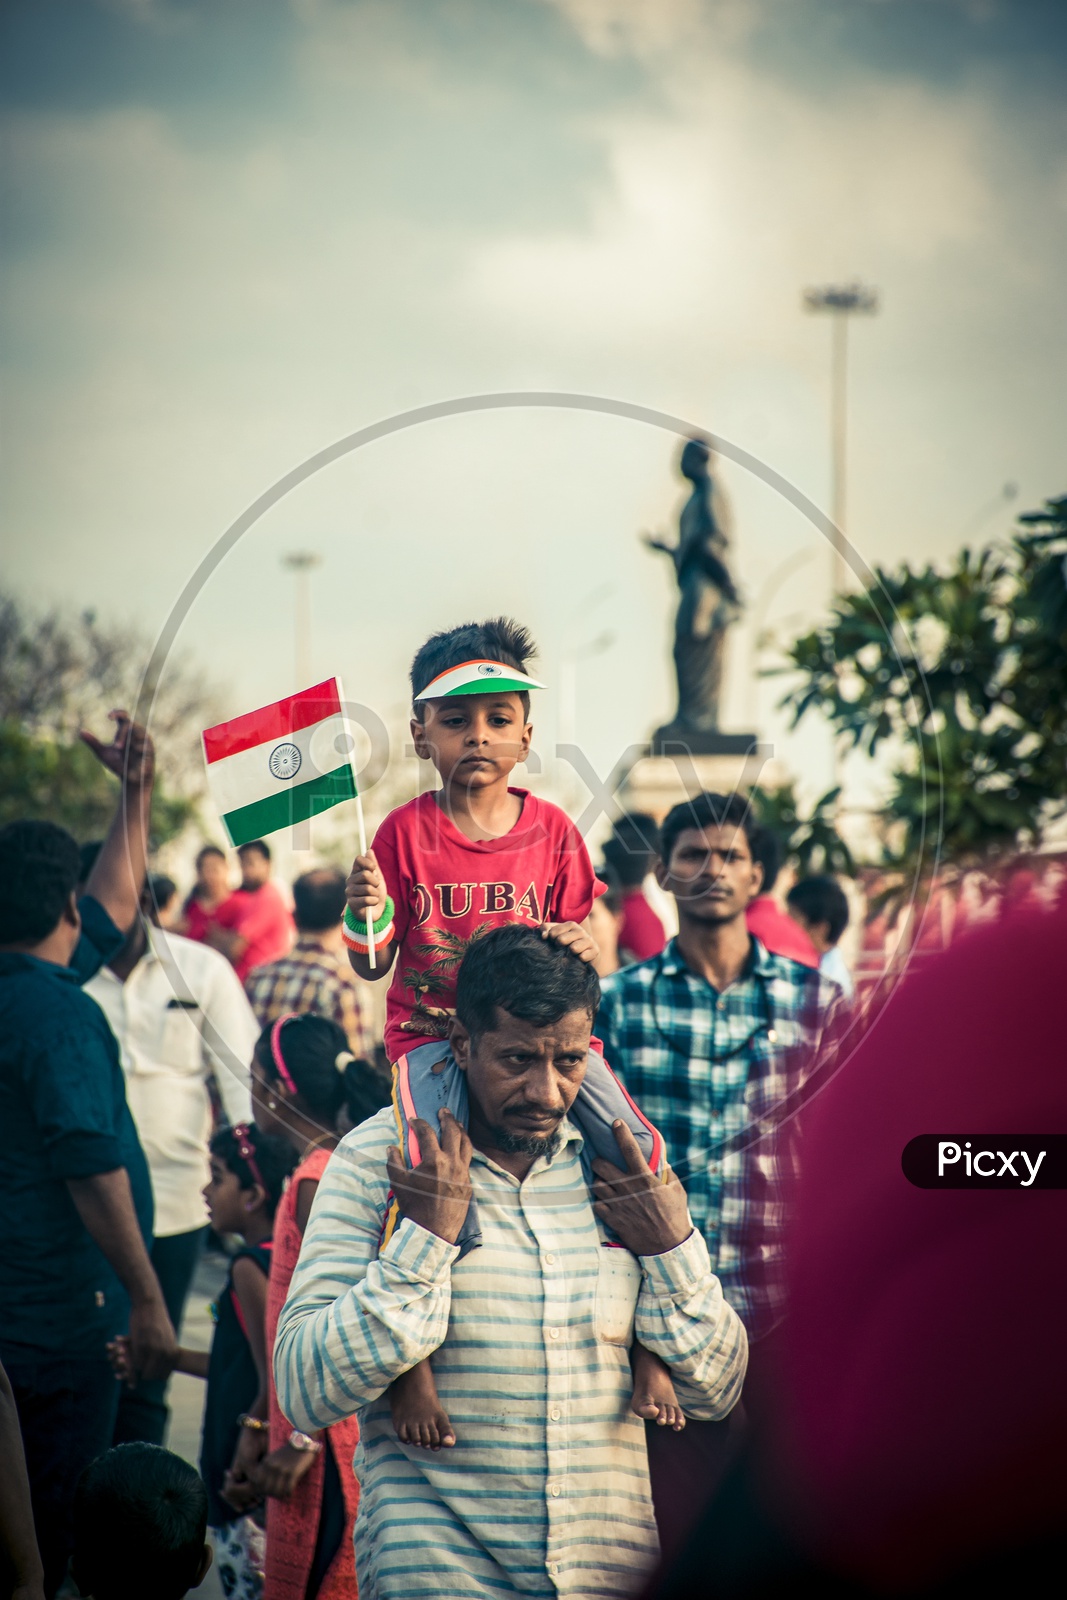 Indian Boy With Tricolor India National Flag in Hand